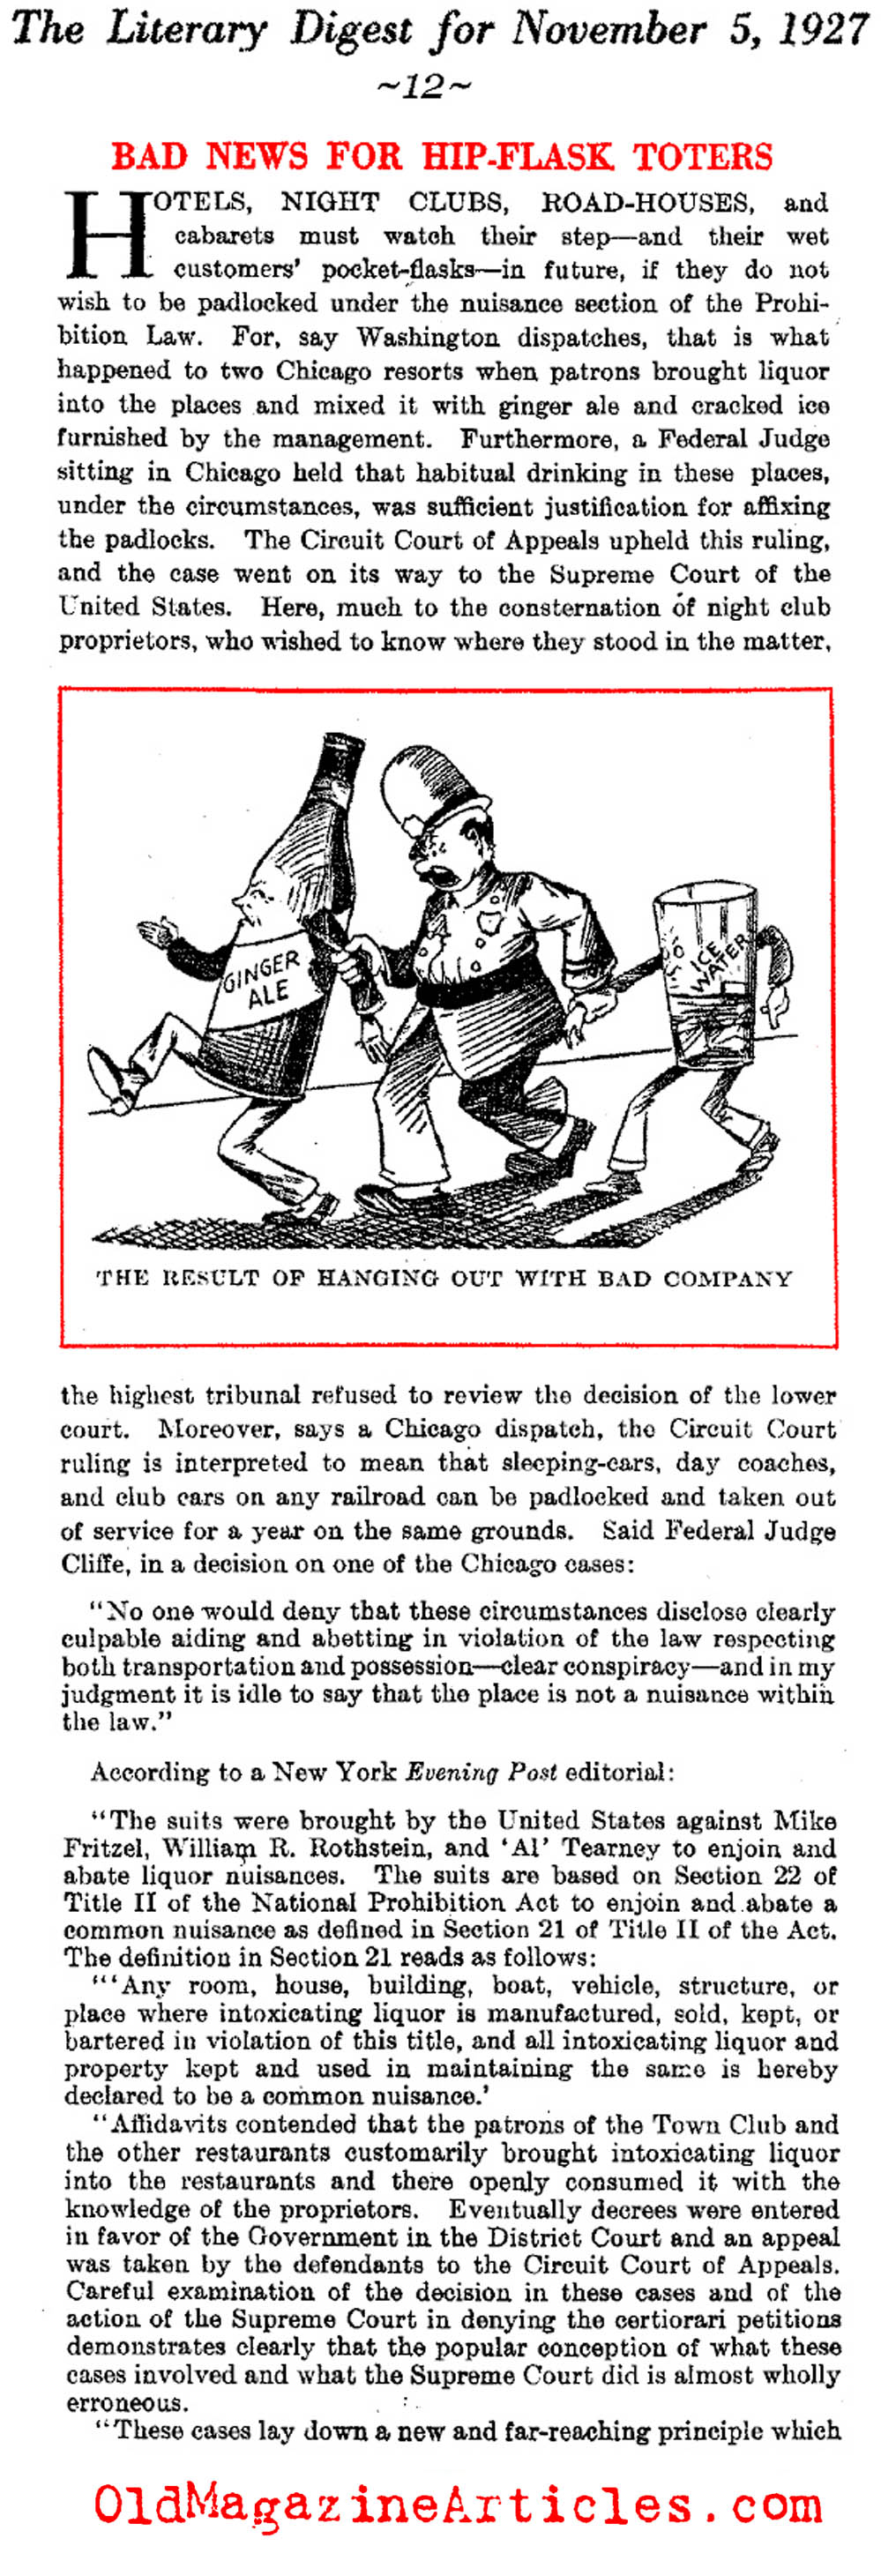 Congress Adresses the Problem of the Hip-Flask (Literary Digest, 1927)